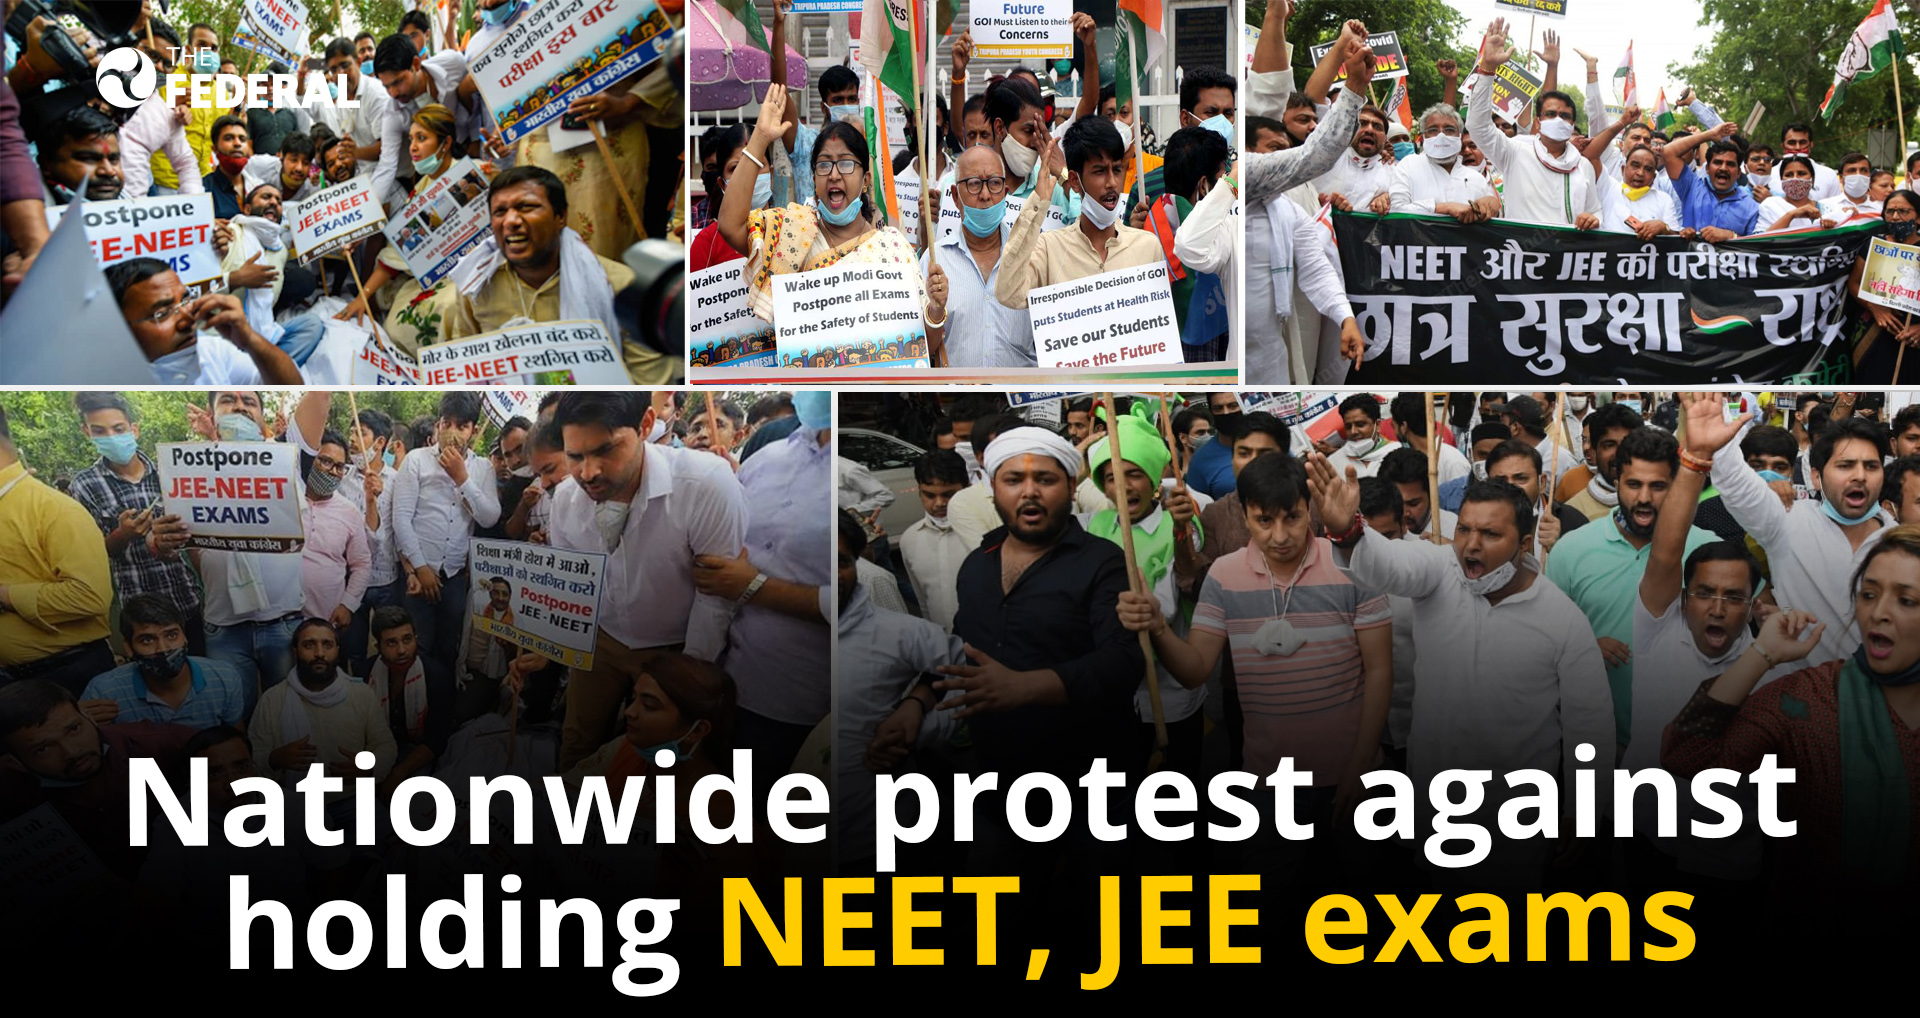 Protest against conduct of NEET-JEE tests intensifies, states file review plea in SC